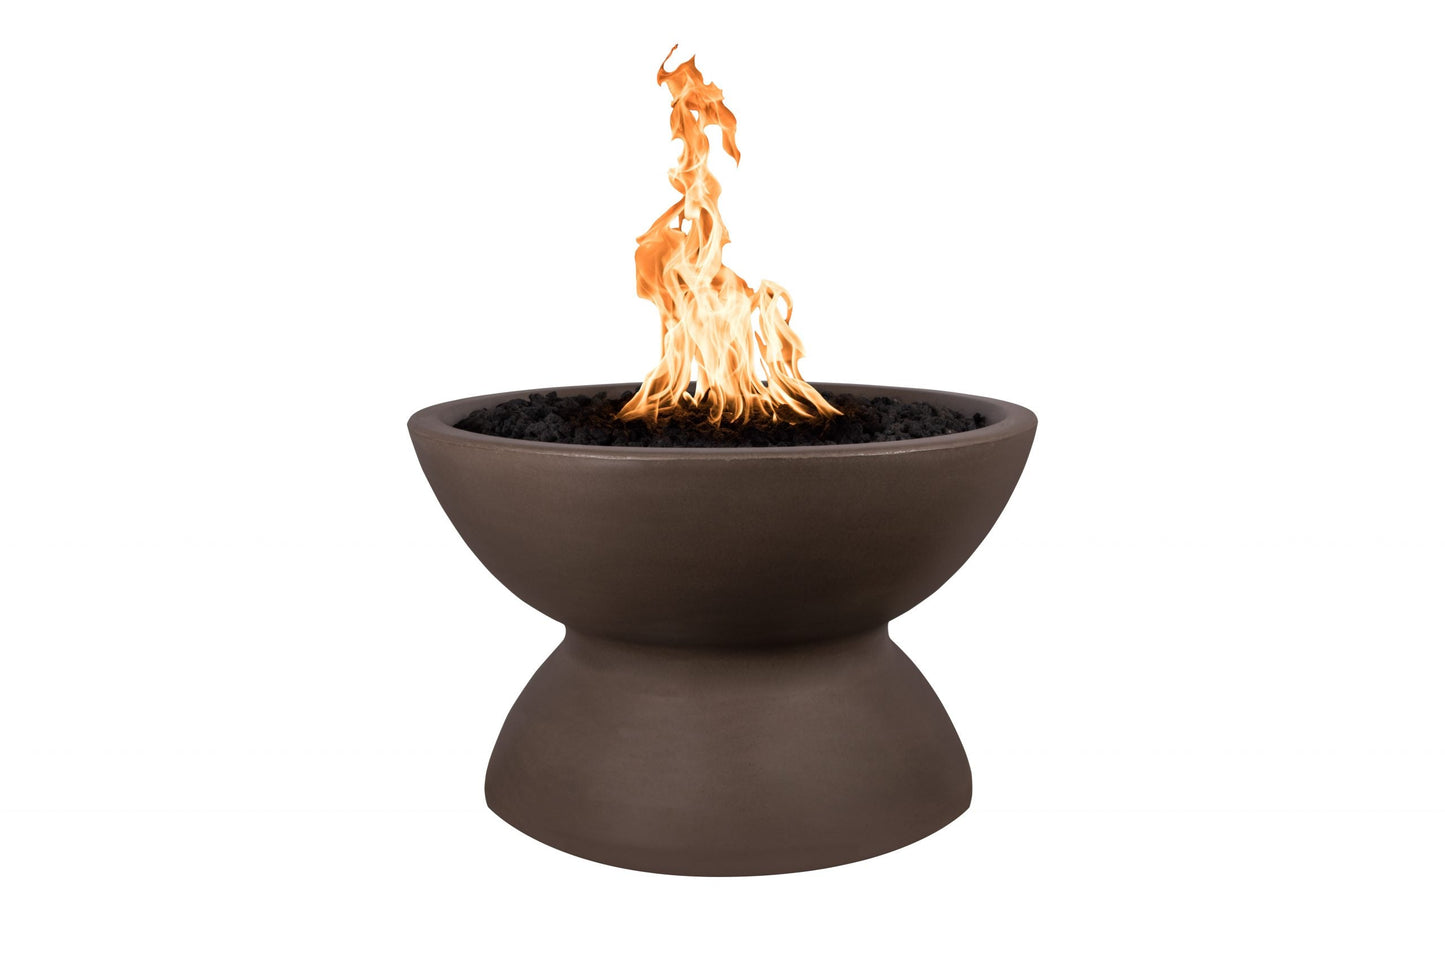 The Outdoor Plus Round Copa 33" Rustic Gray GFRC Concrete Liquid Propane Fire Pit with Match Lit Ignition